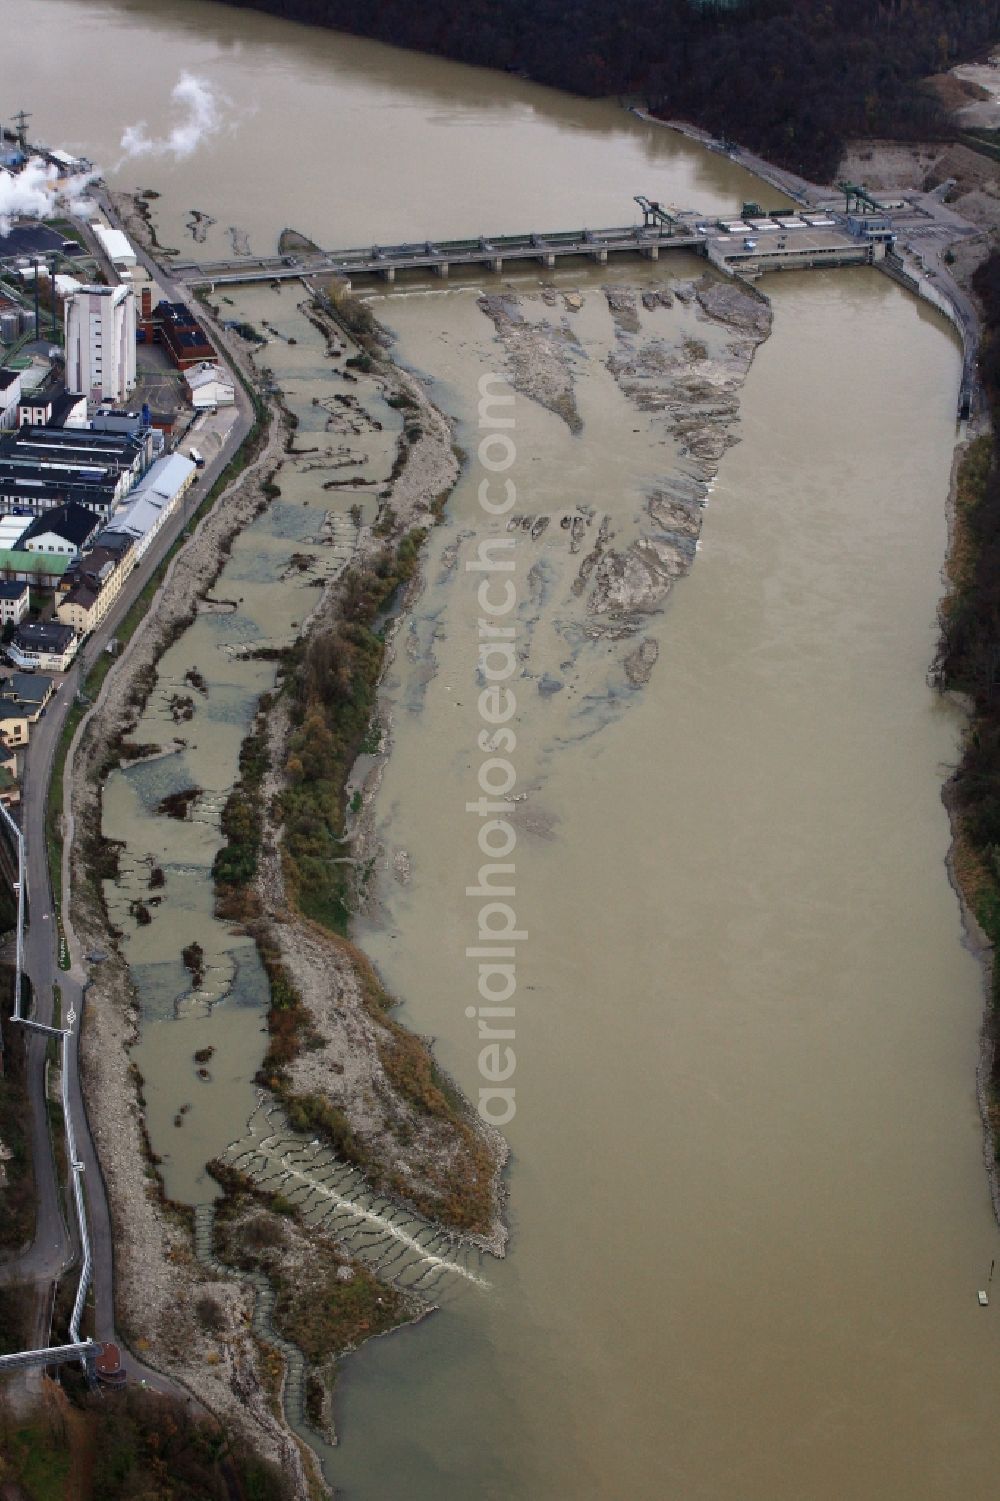 Rheinfelden (Baden) from the bird's eye view: Riparian areas, fish ladder and rock formations on the river Rhine power plant in Rheinfelden (Baden) in the state of Baden-Wuerttemberg